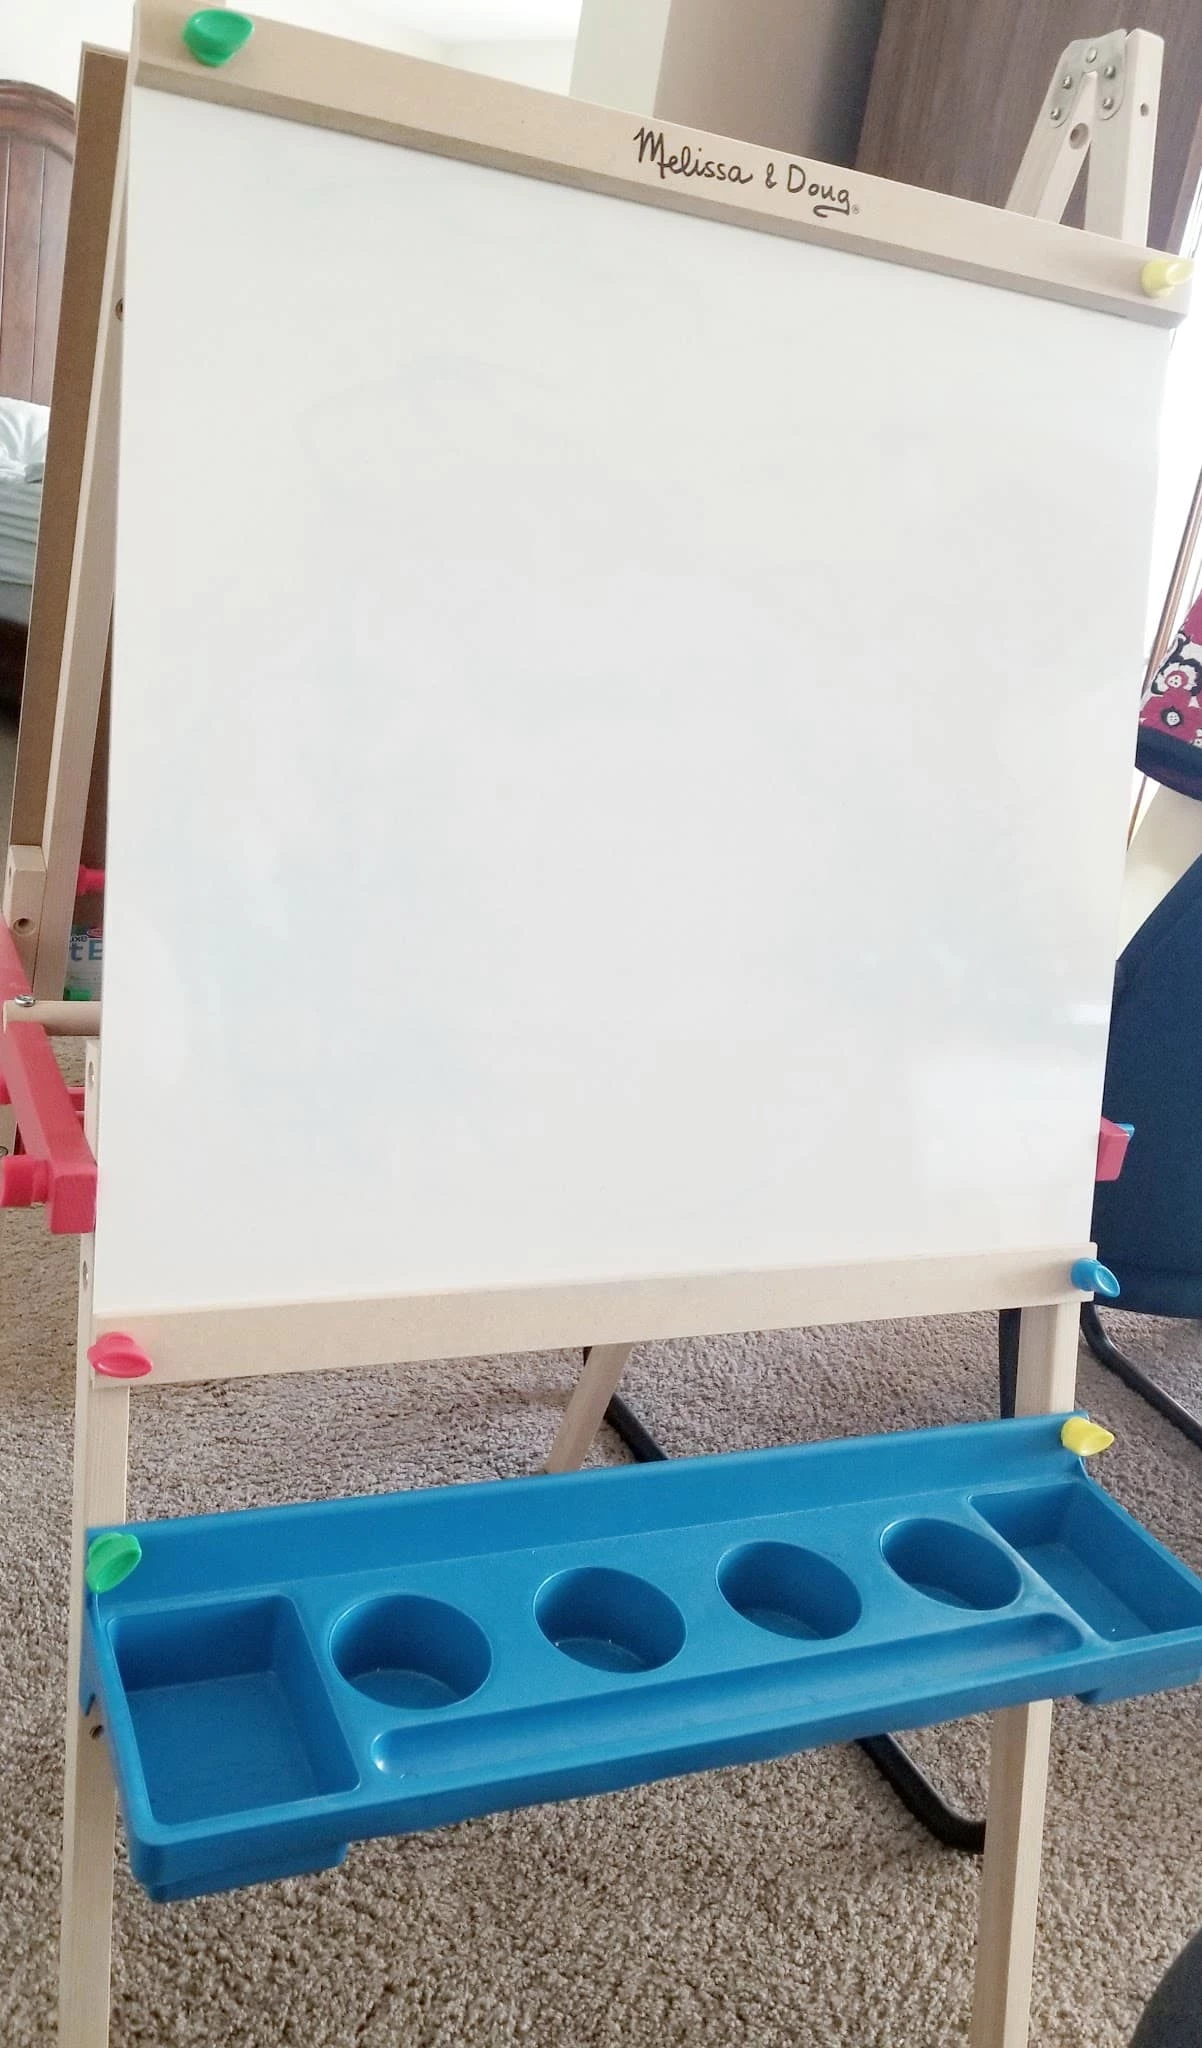 Creative Toys for Toddlers - Melissa and Doug Easel Review 3